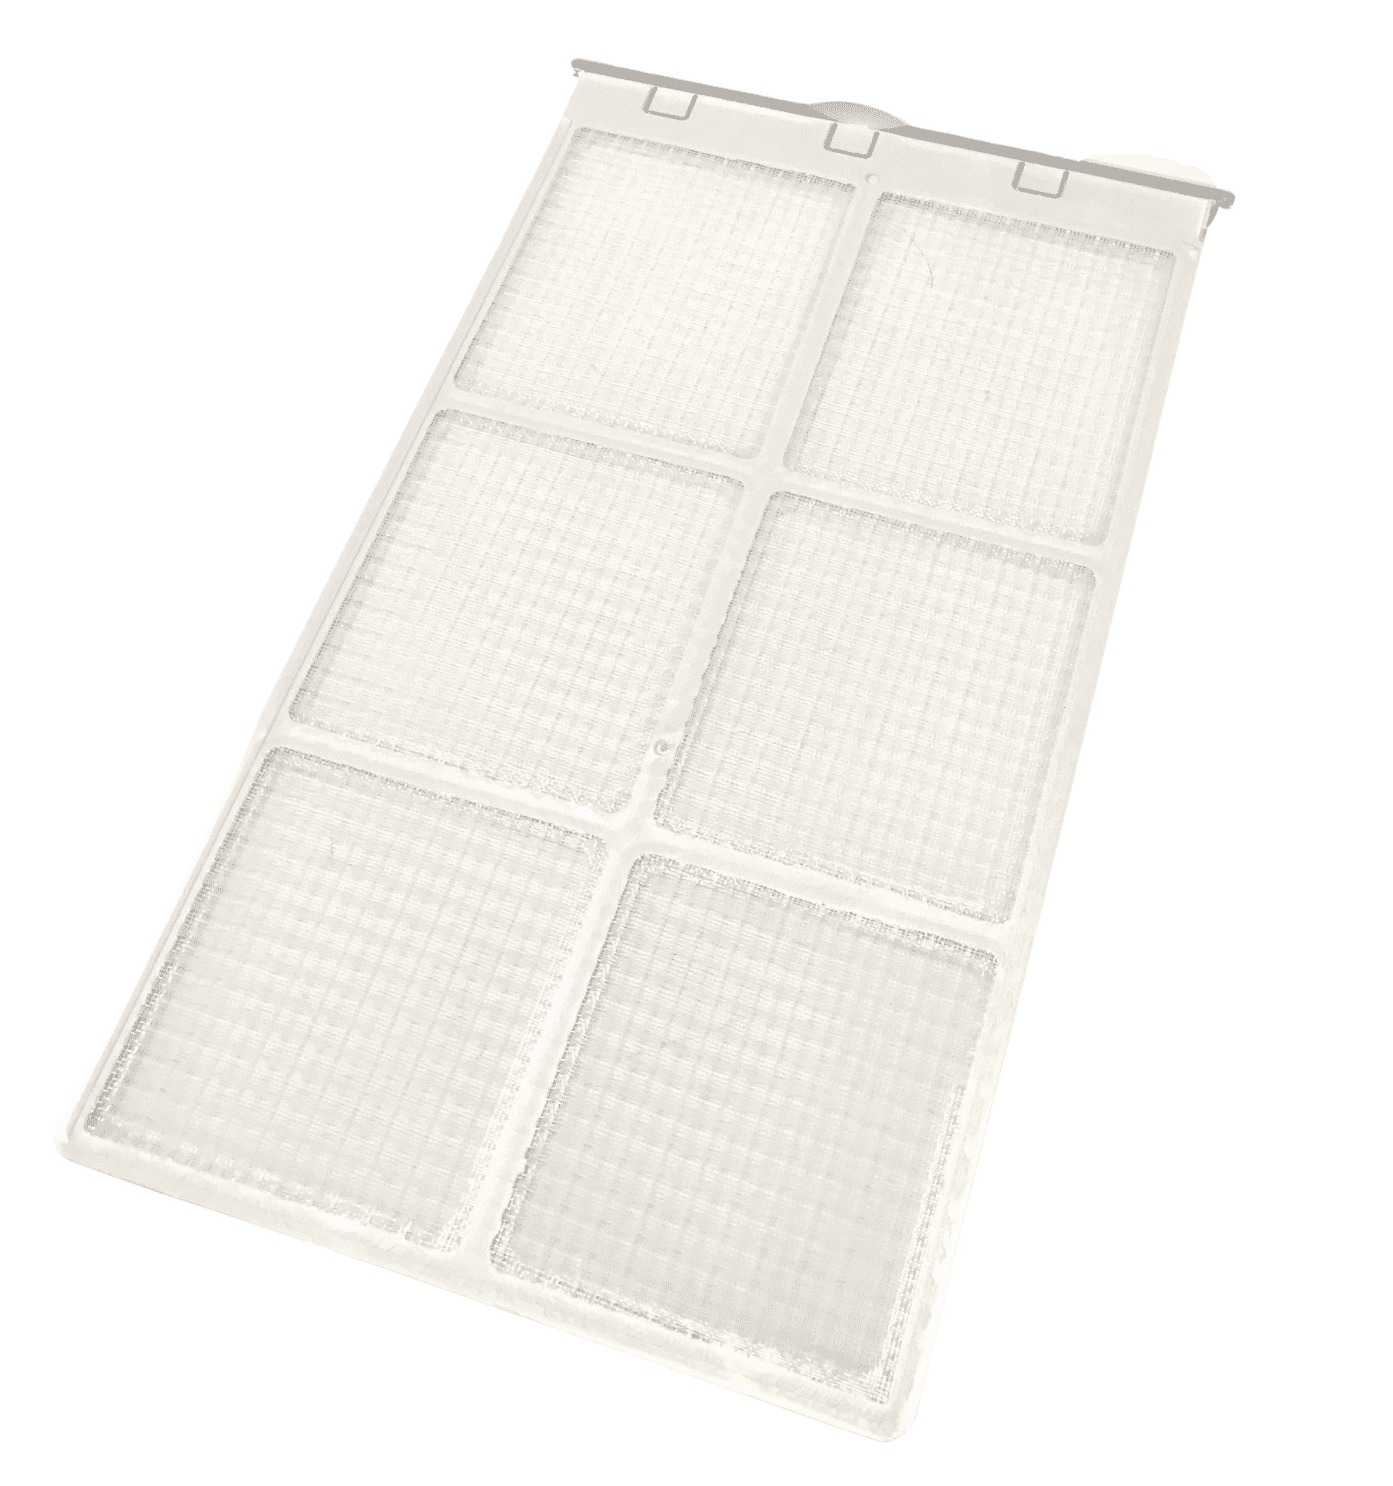 GE AHP05LZ window unit AC filter obstructed by loose bracket/cord